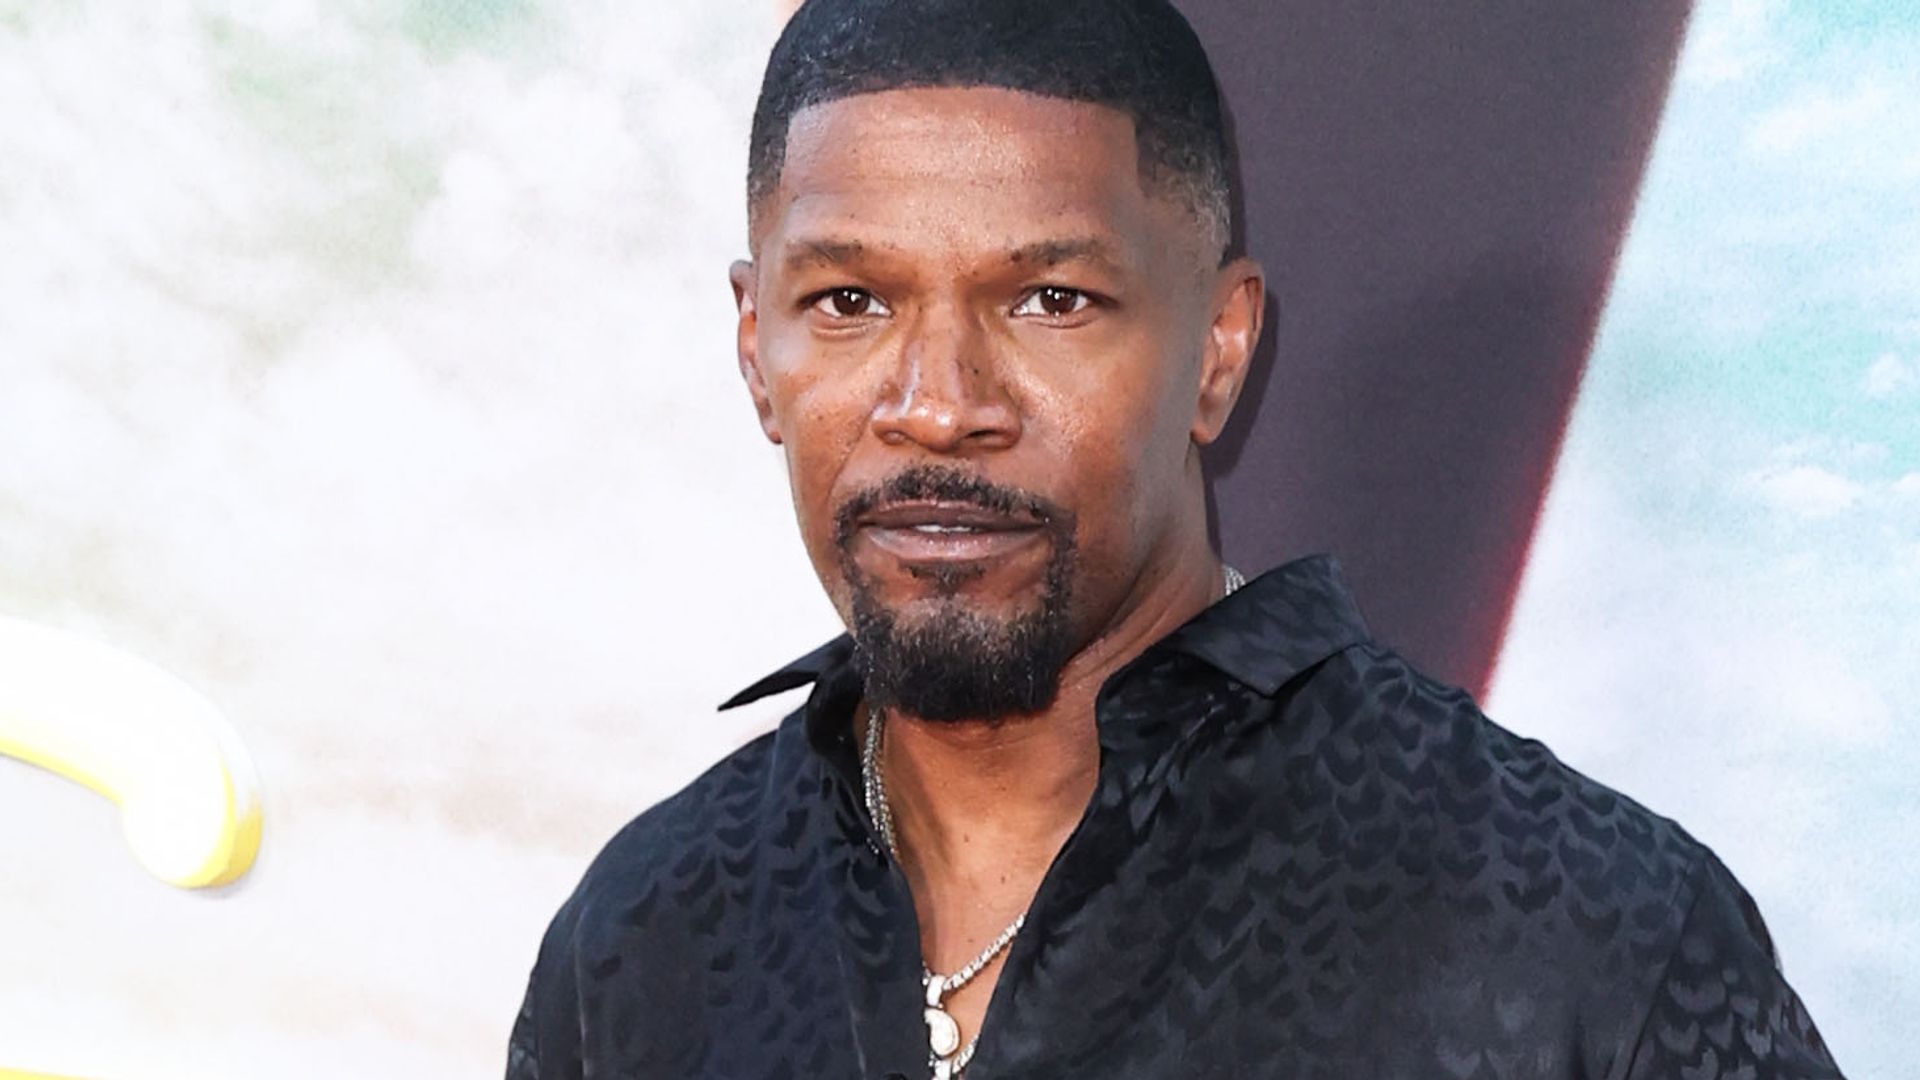 Jamie Foxx at World Premiere Of Netflix's 'Day Shift' held at Regal Cinemas LA Live Stadium 14 on August 10, 2022 in Los Angeles, California, United States